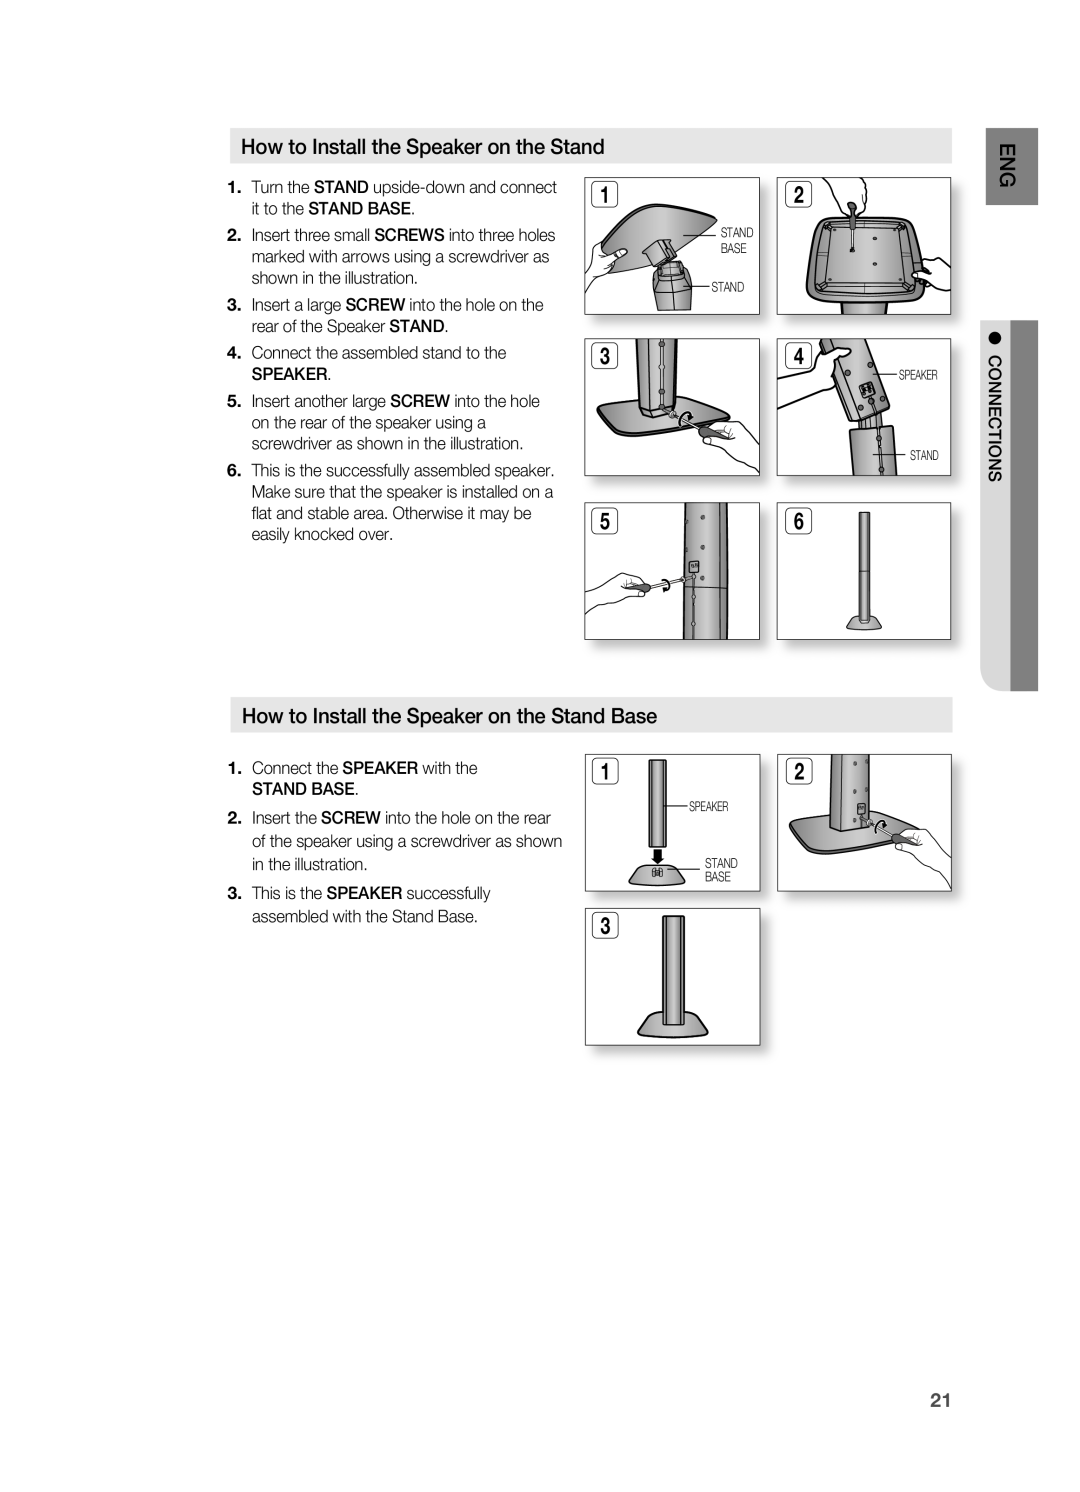 Samsung HT-TWZ315 manual How to install the Speaker on the Stand Base 